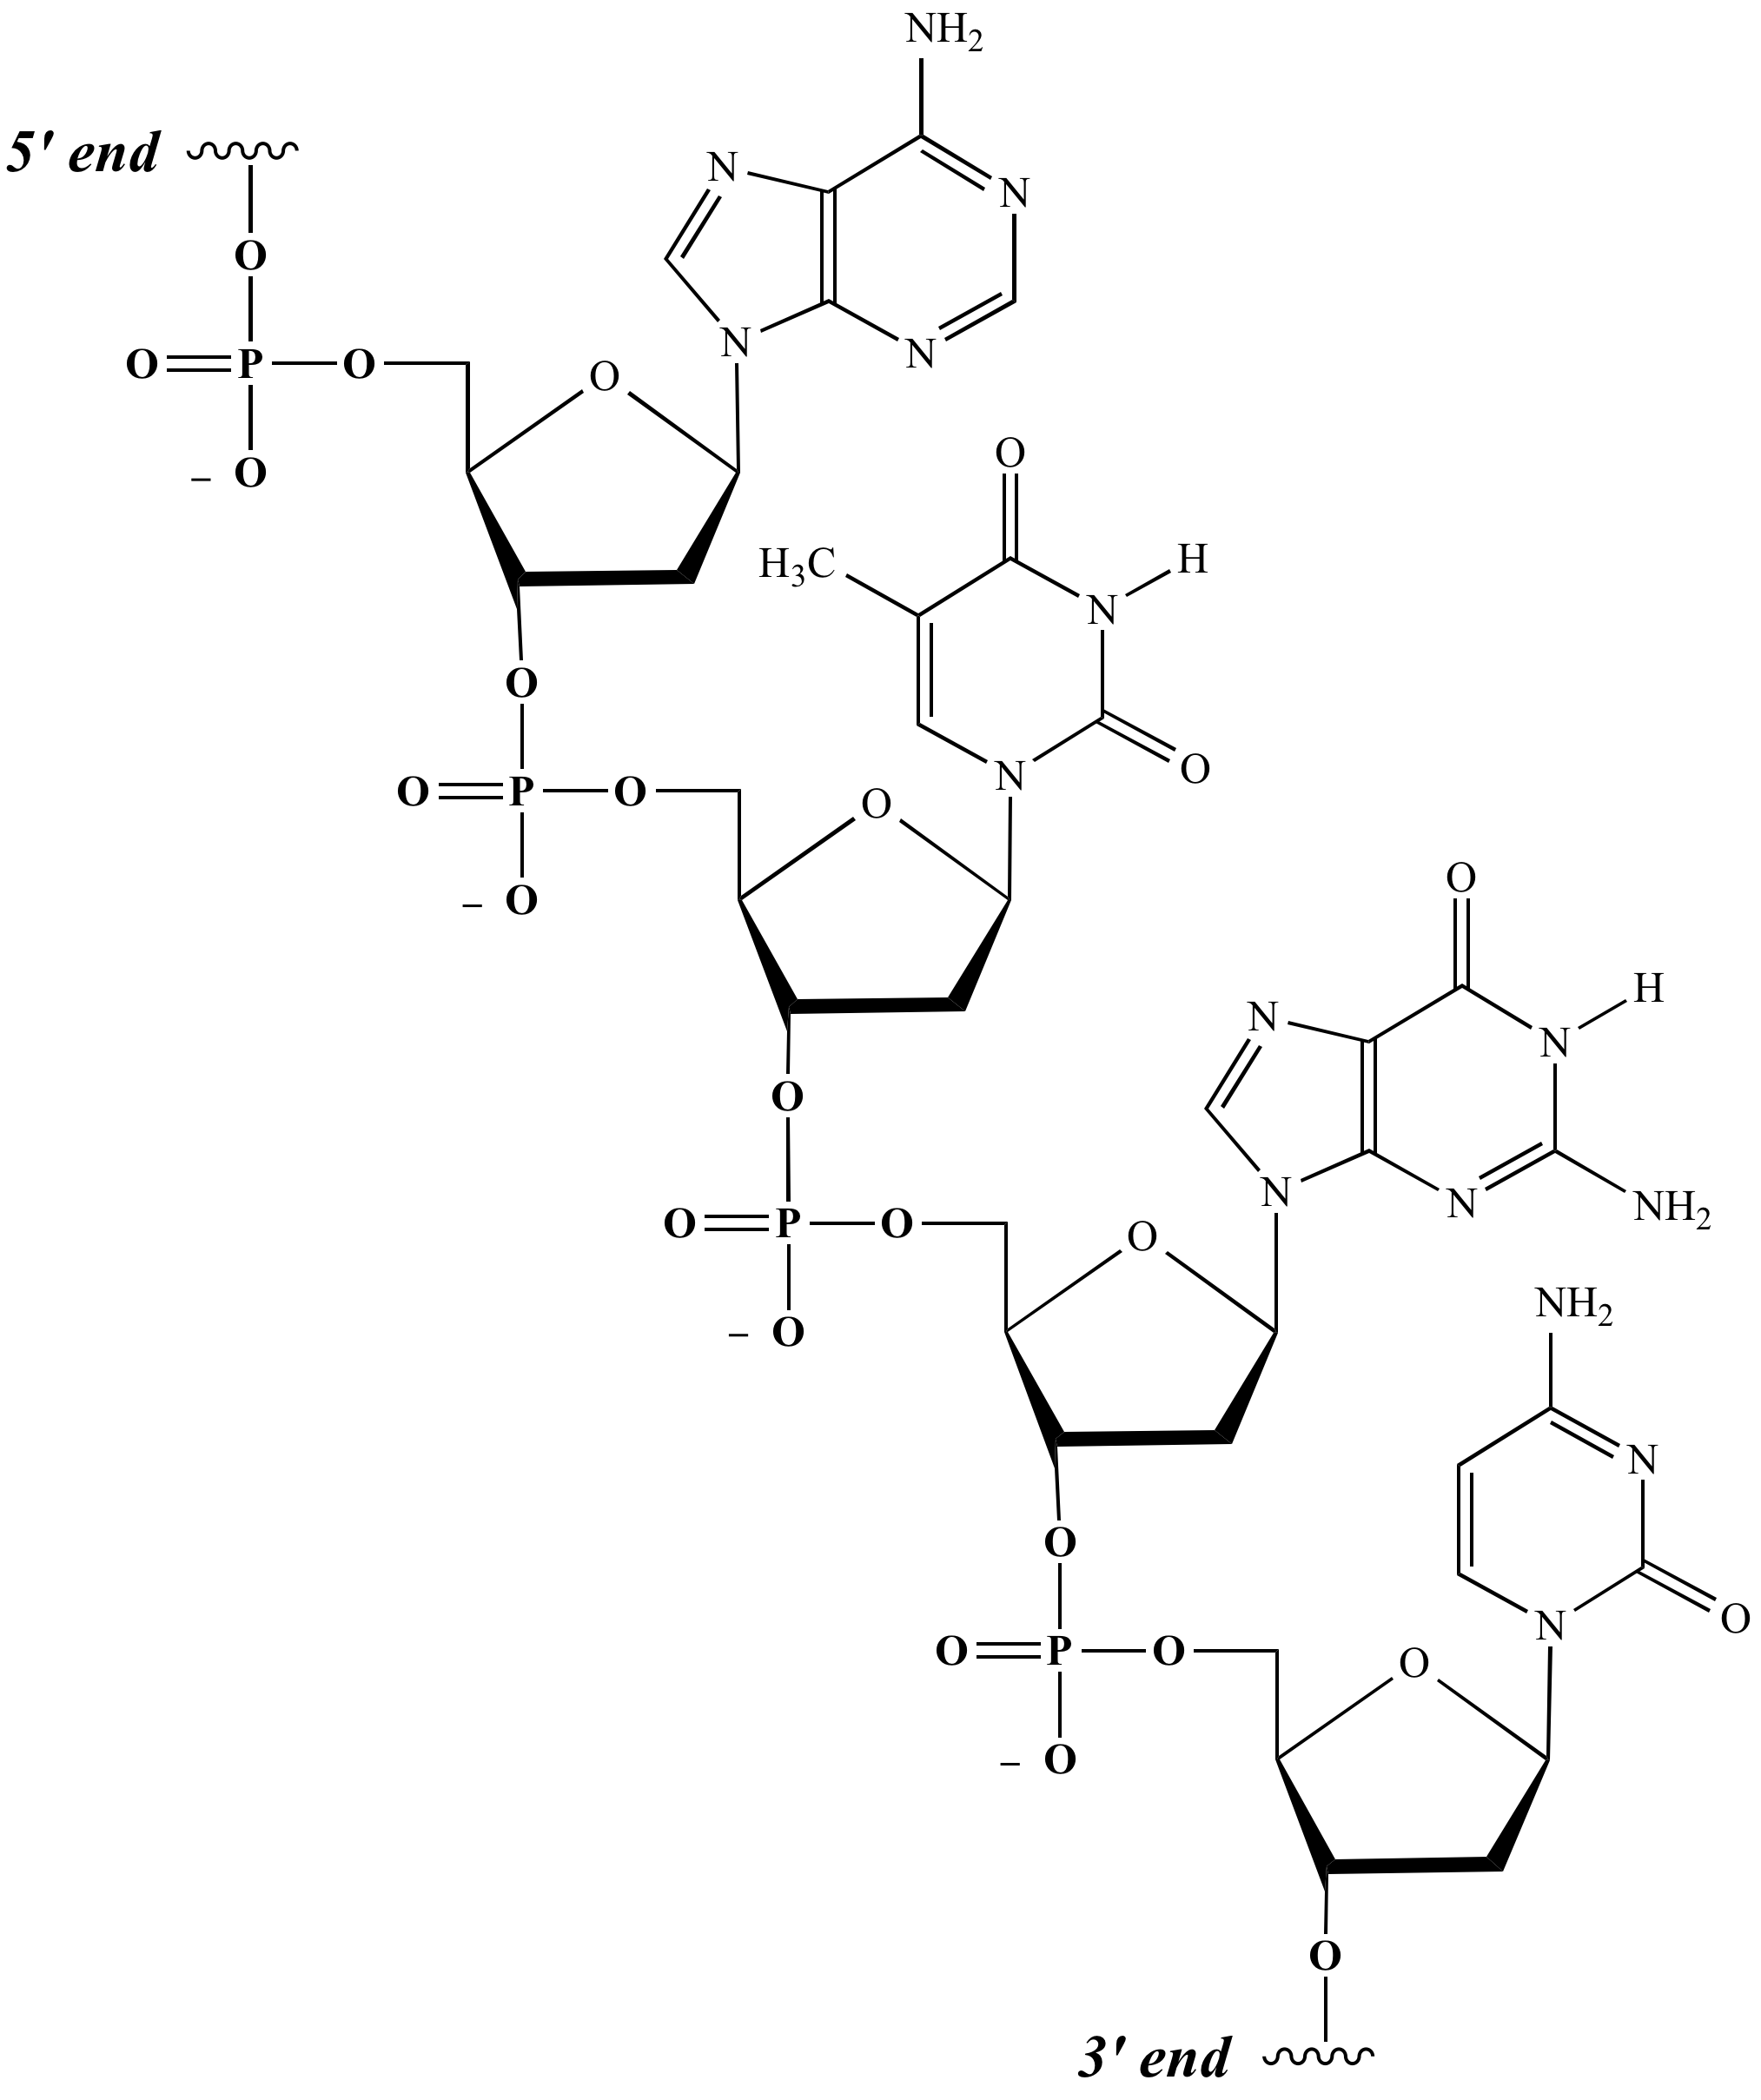 chemical structure of nucleic acids